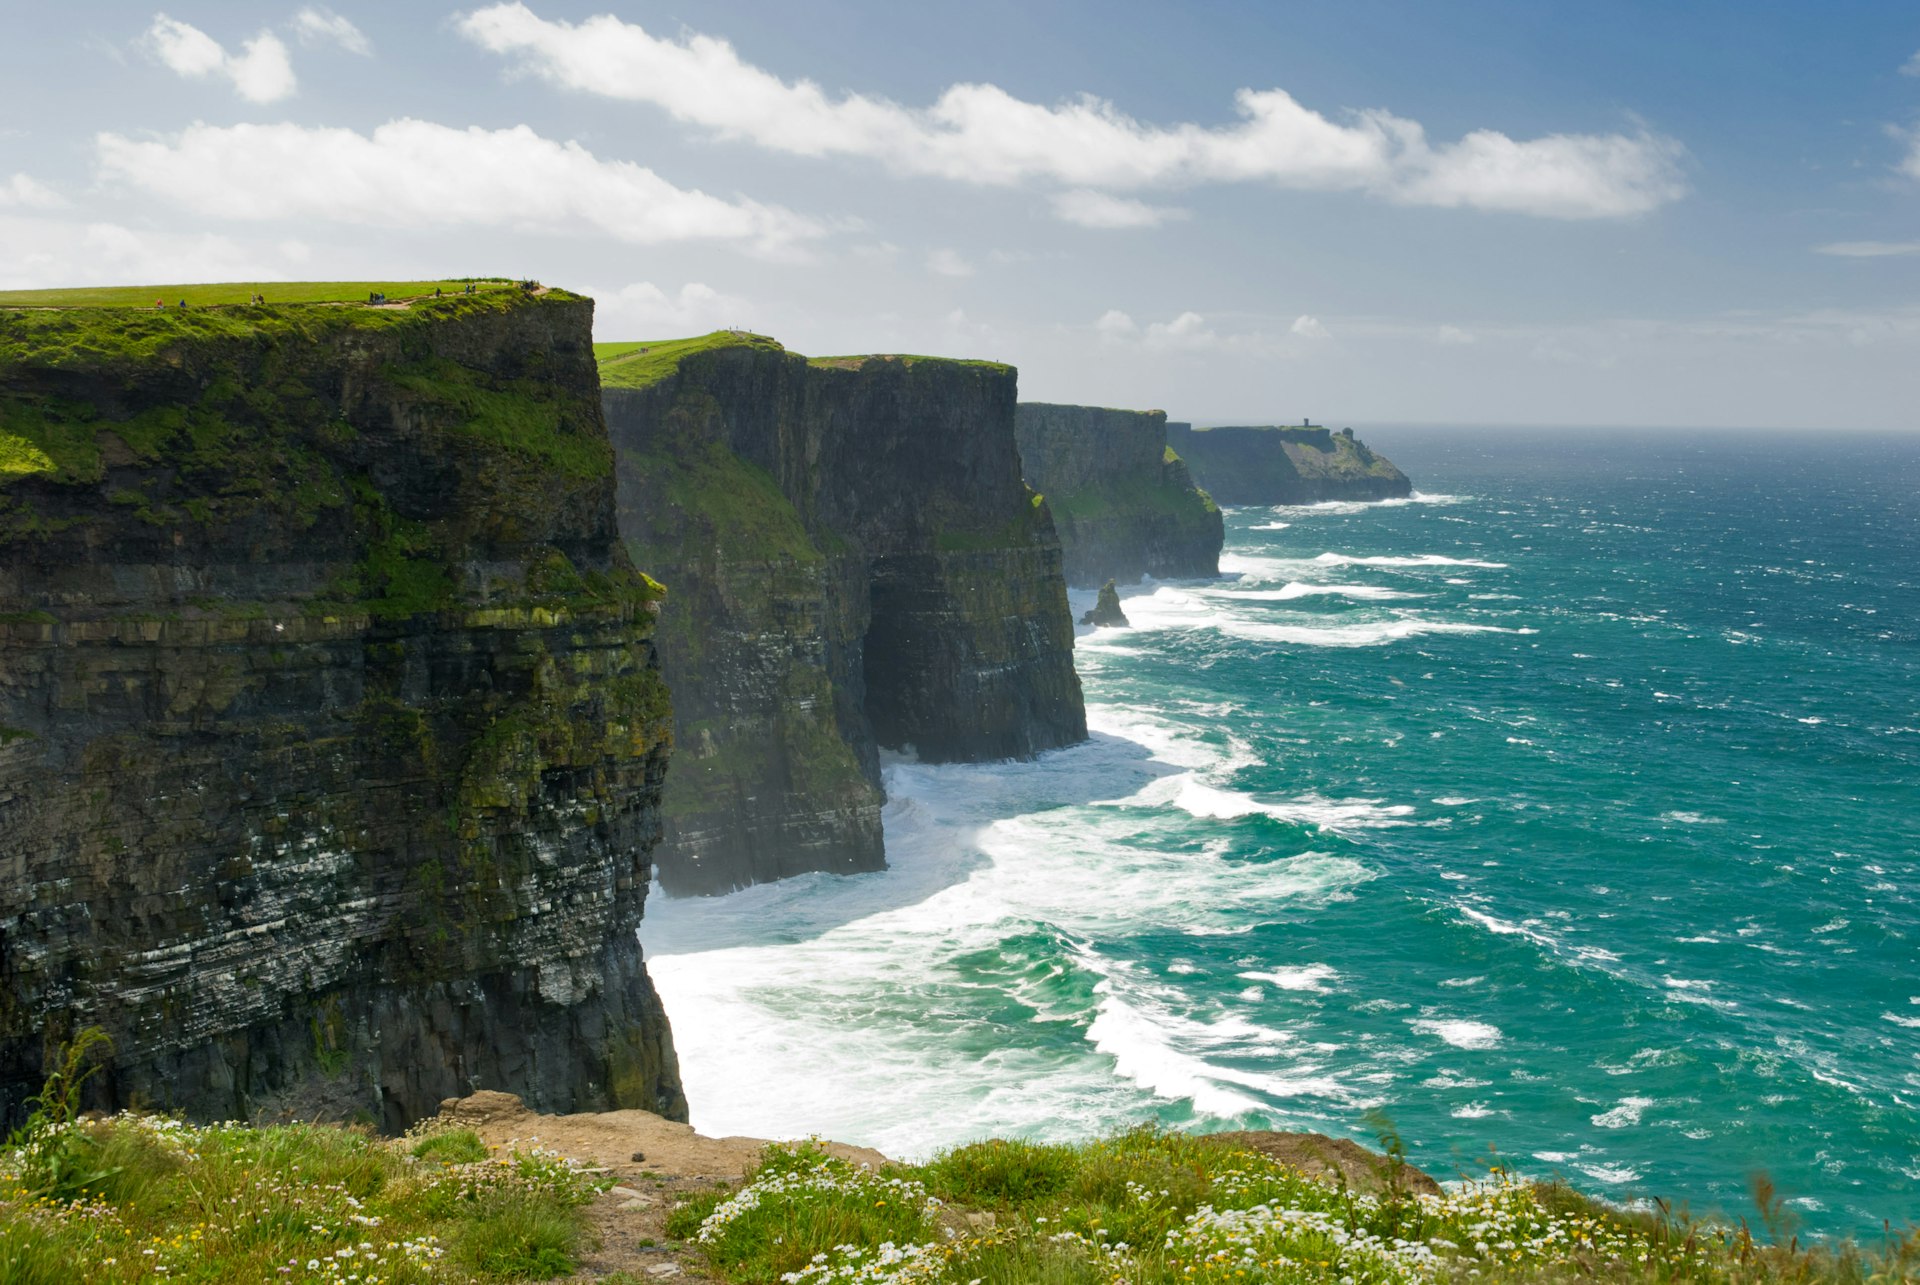 Dramatic view of the Cliffs of Moher.